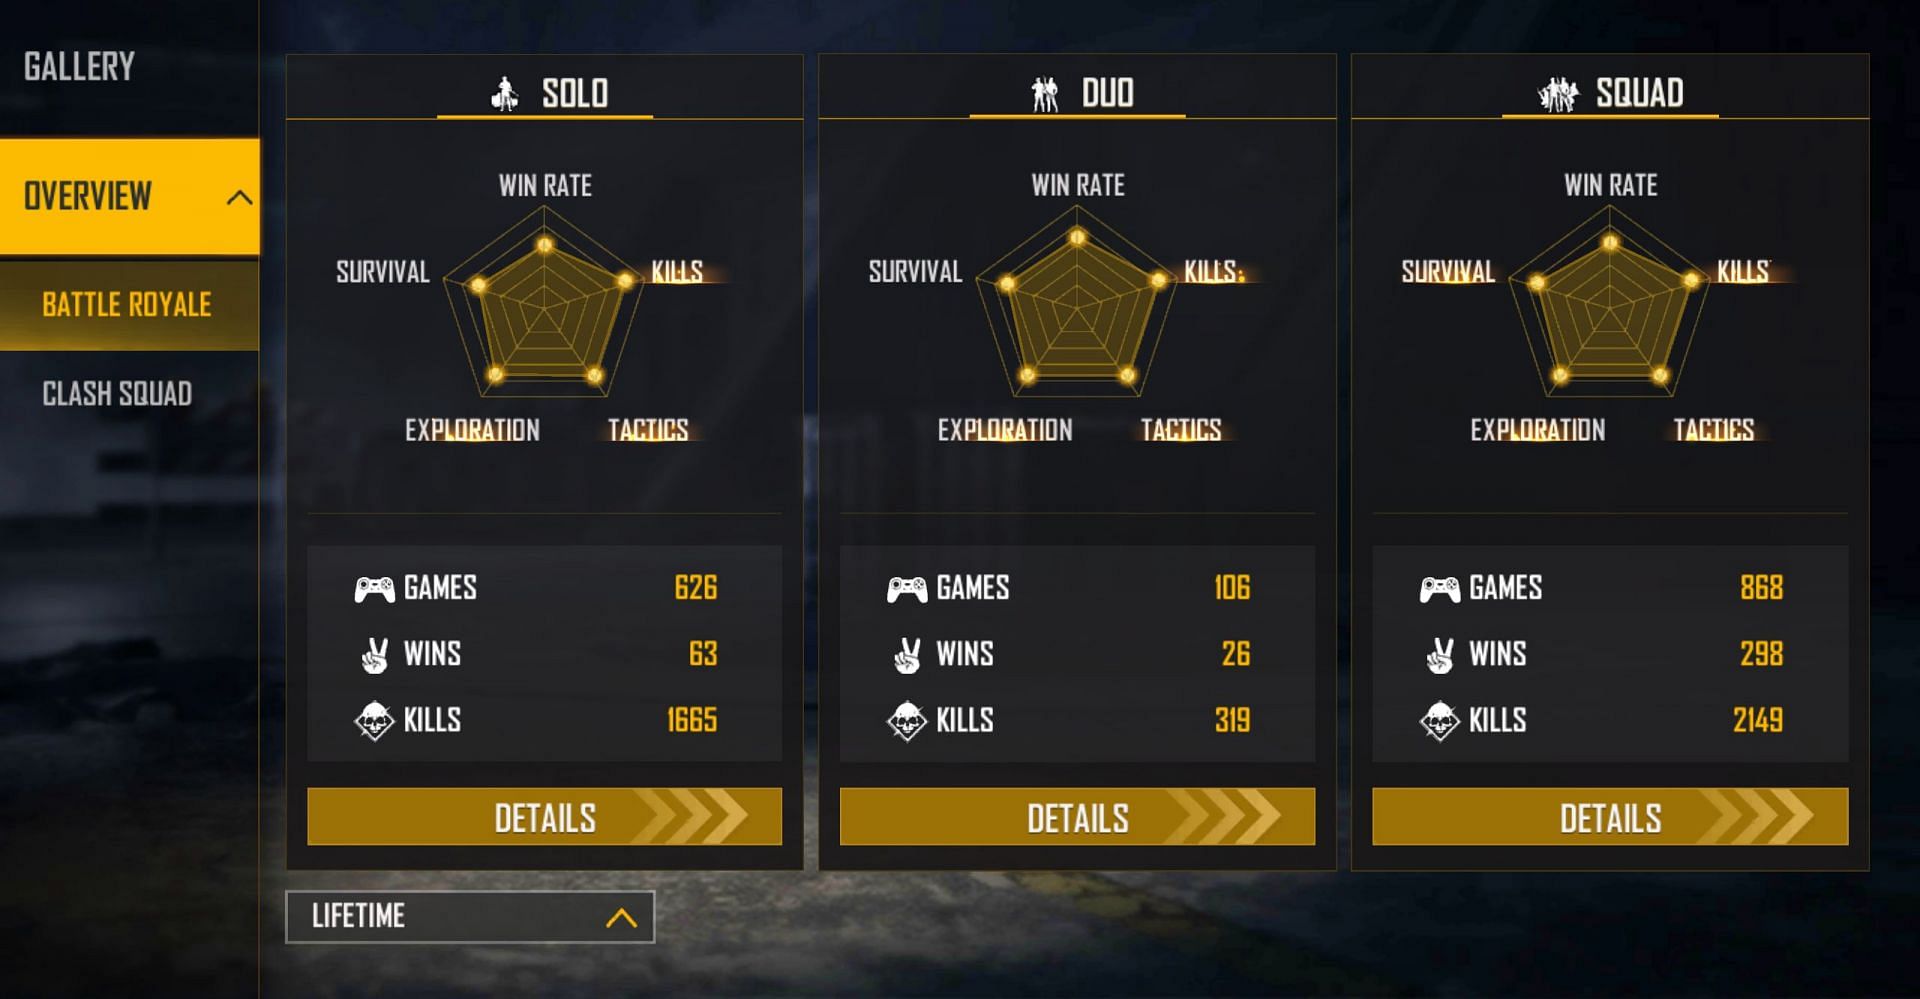 He has maintained pretty good lifetime stats in the battle royale title (Image via Free Fire)